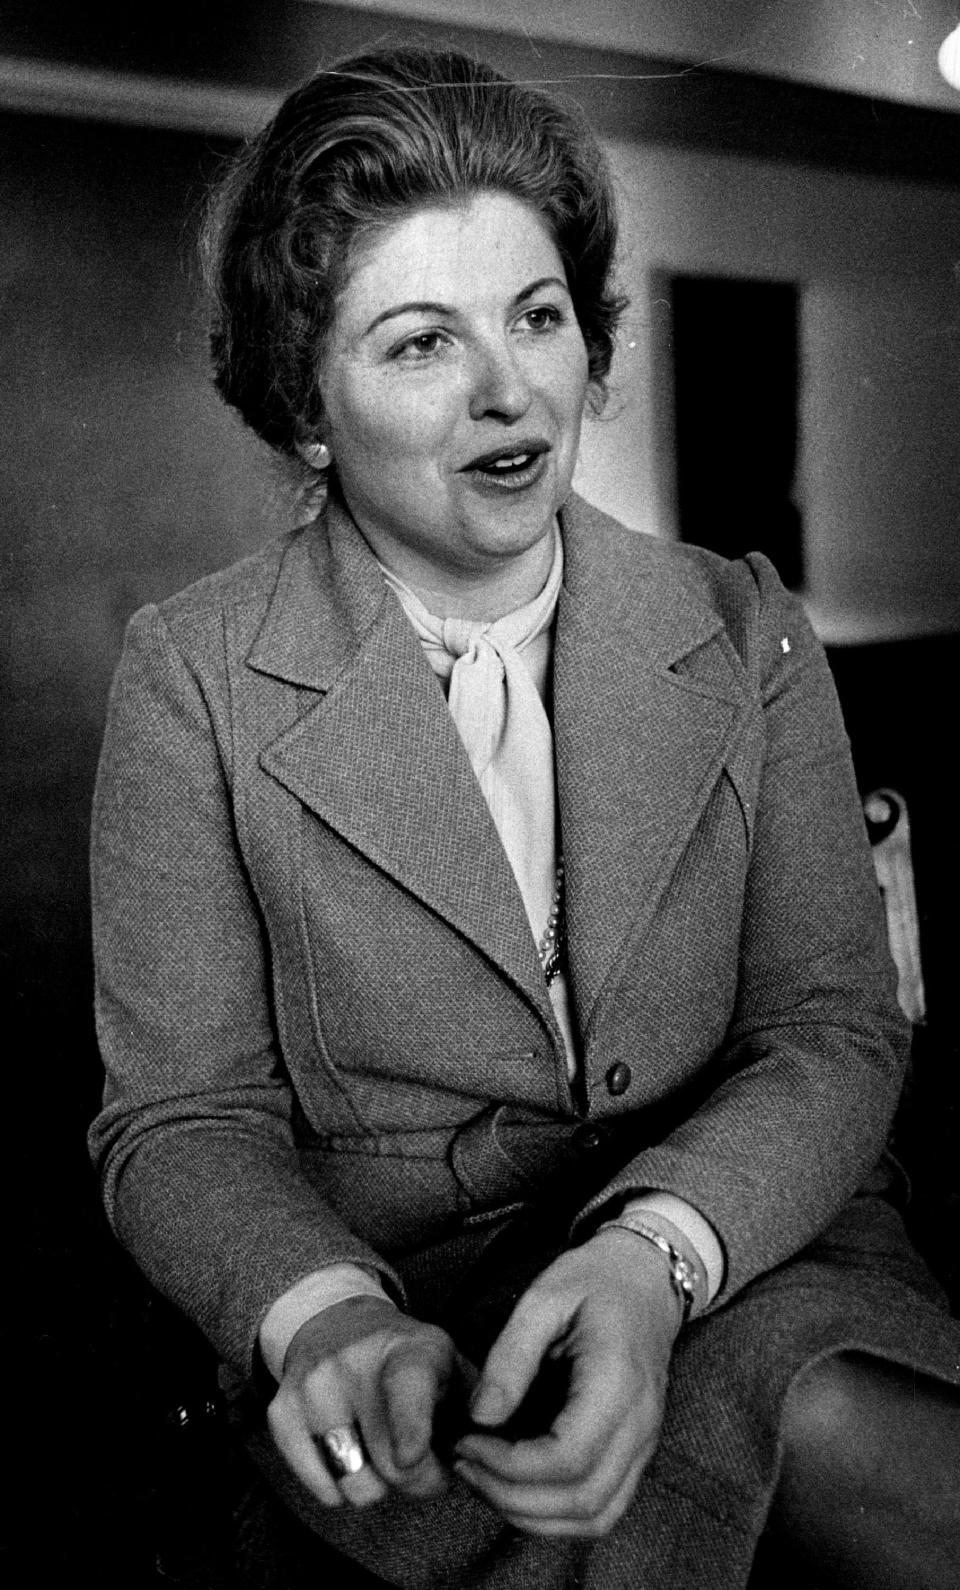 Sarah Weddington is shown here in 1979, six years after she argued and won Roe v. Wade before the Supreme Court. (Denver Post via Getty Images)